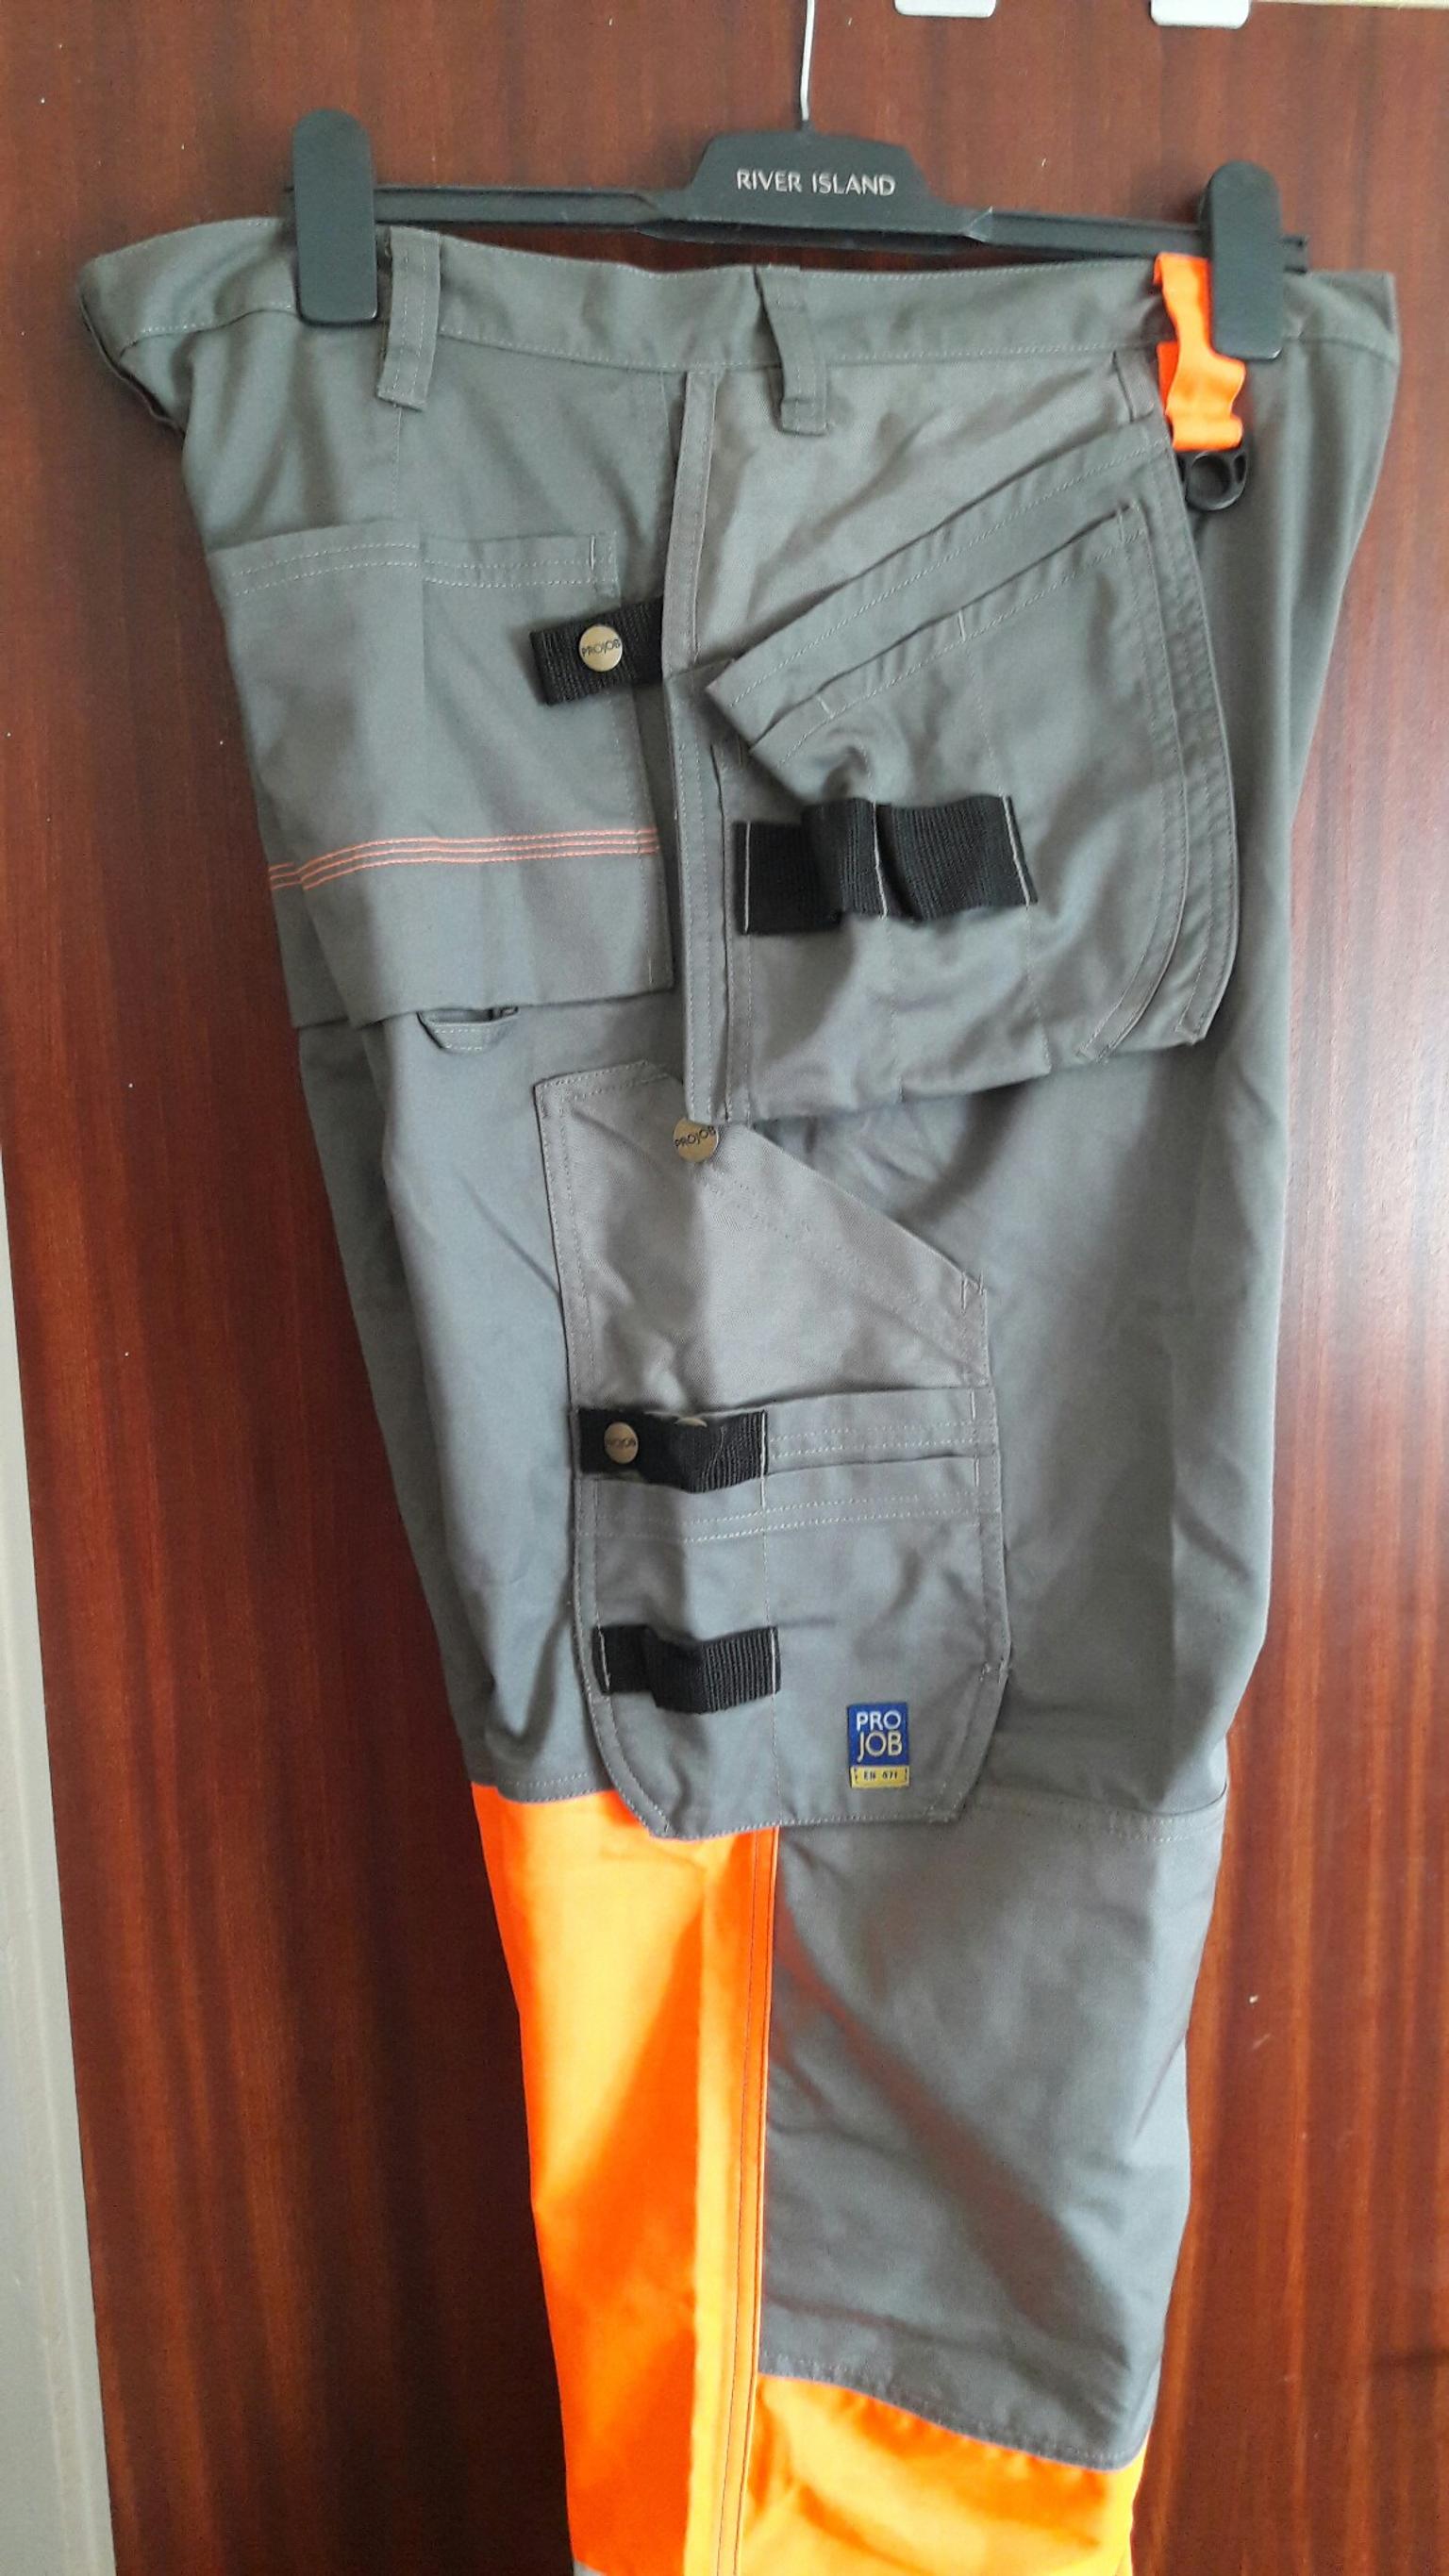 Class 1-646502 Projob Hi Vis Work Trousers with Knee Pad & Holster Pockets